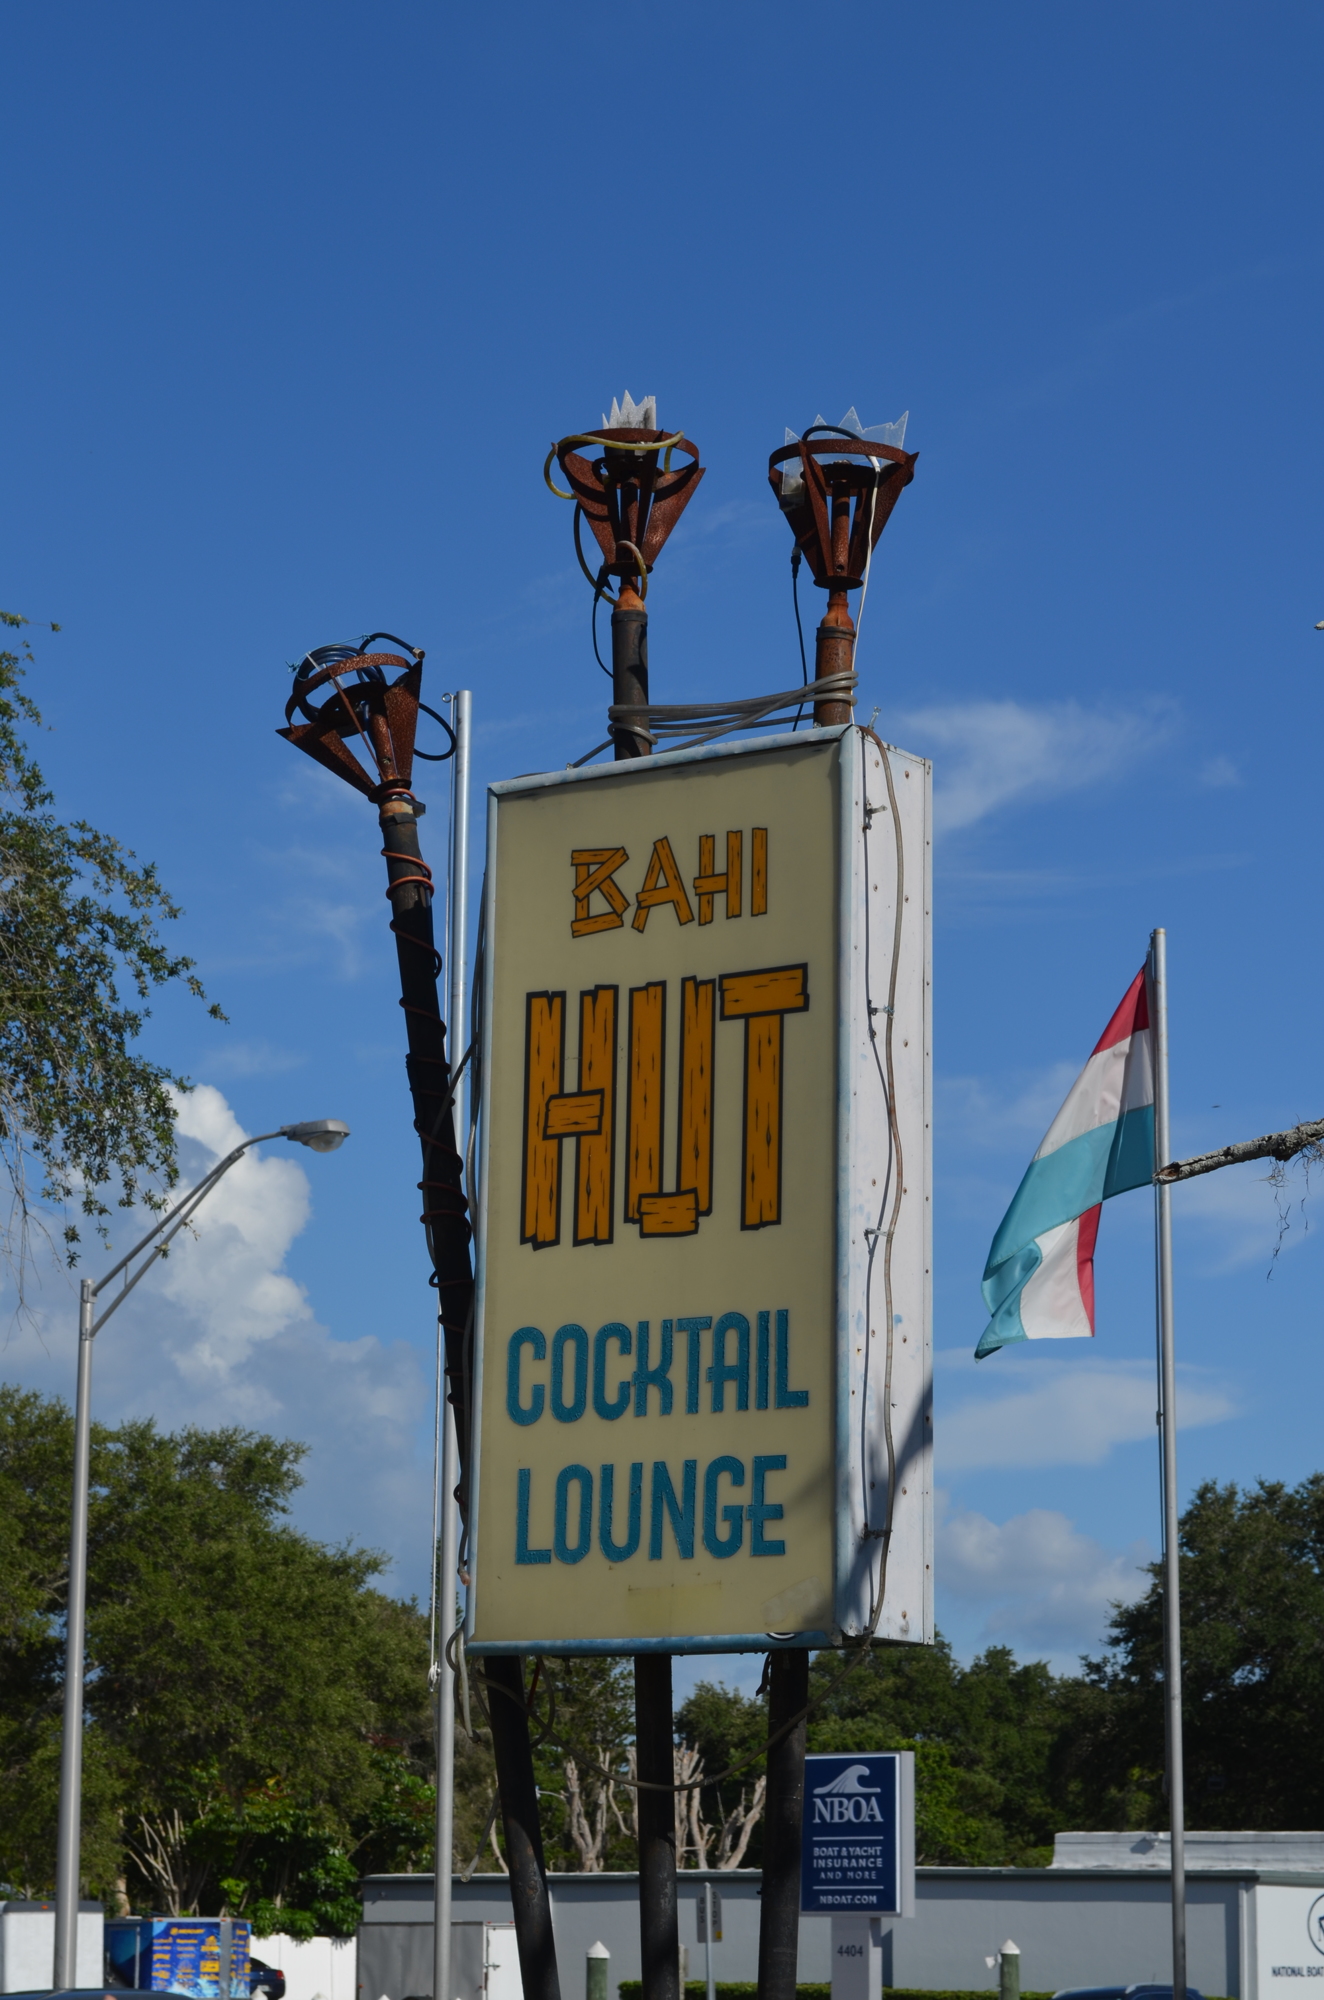 Proposed updates to the Bahi Hut include lighting the original torches on the roadfront sign along U.S. 41.